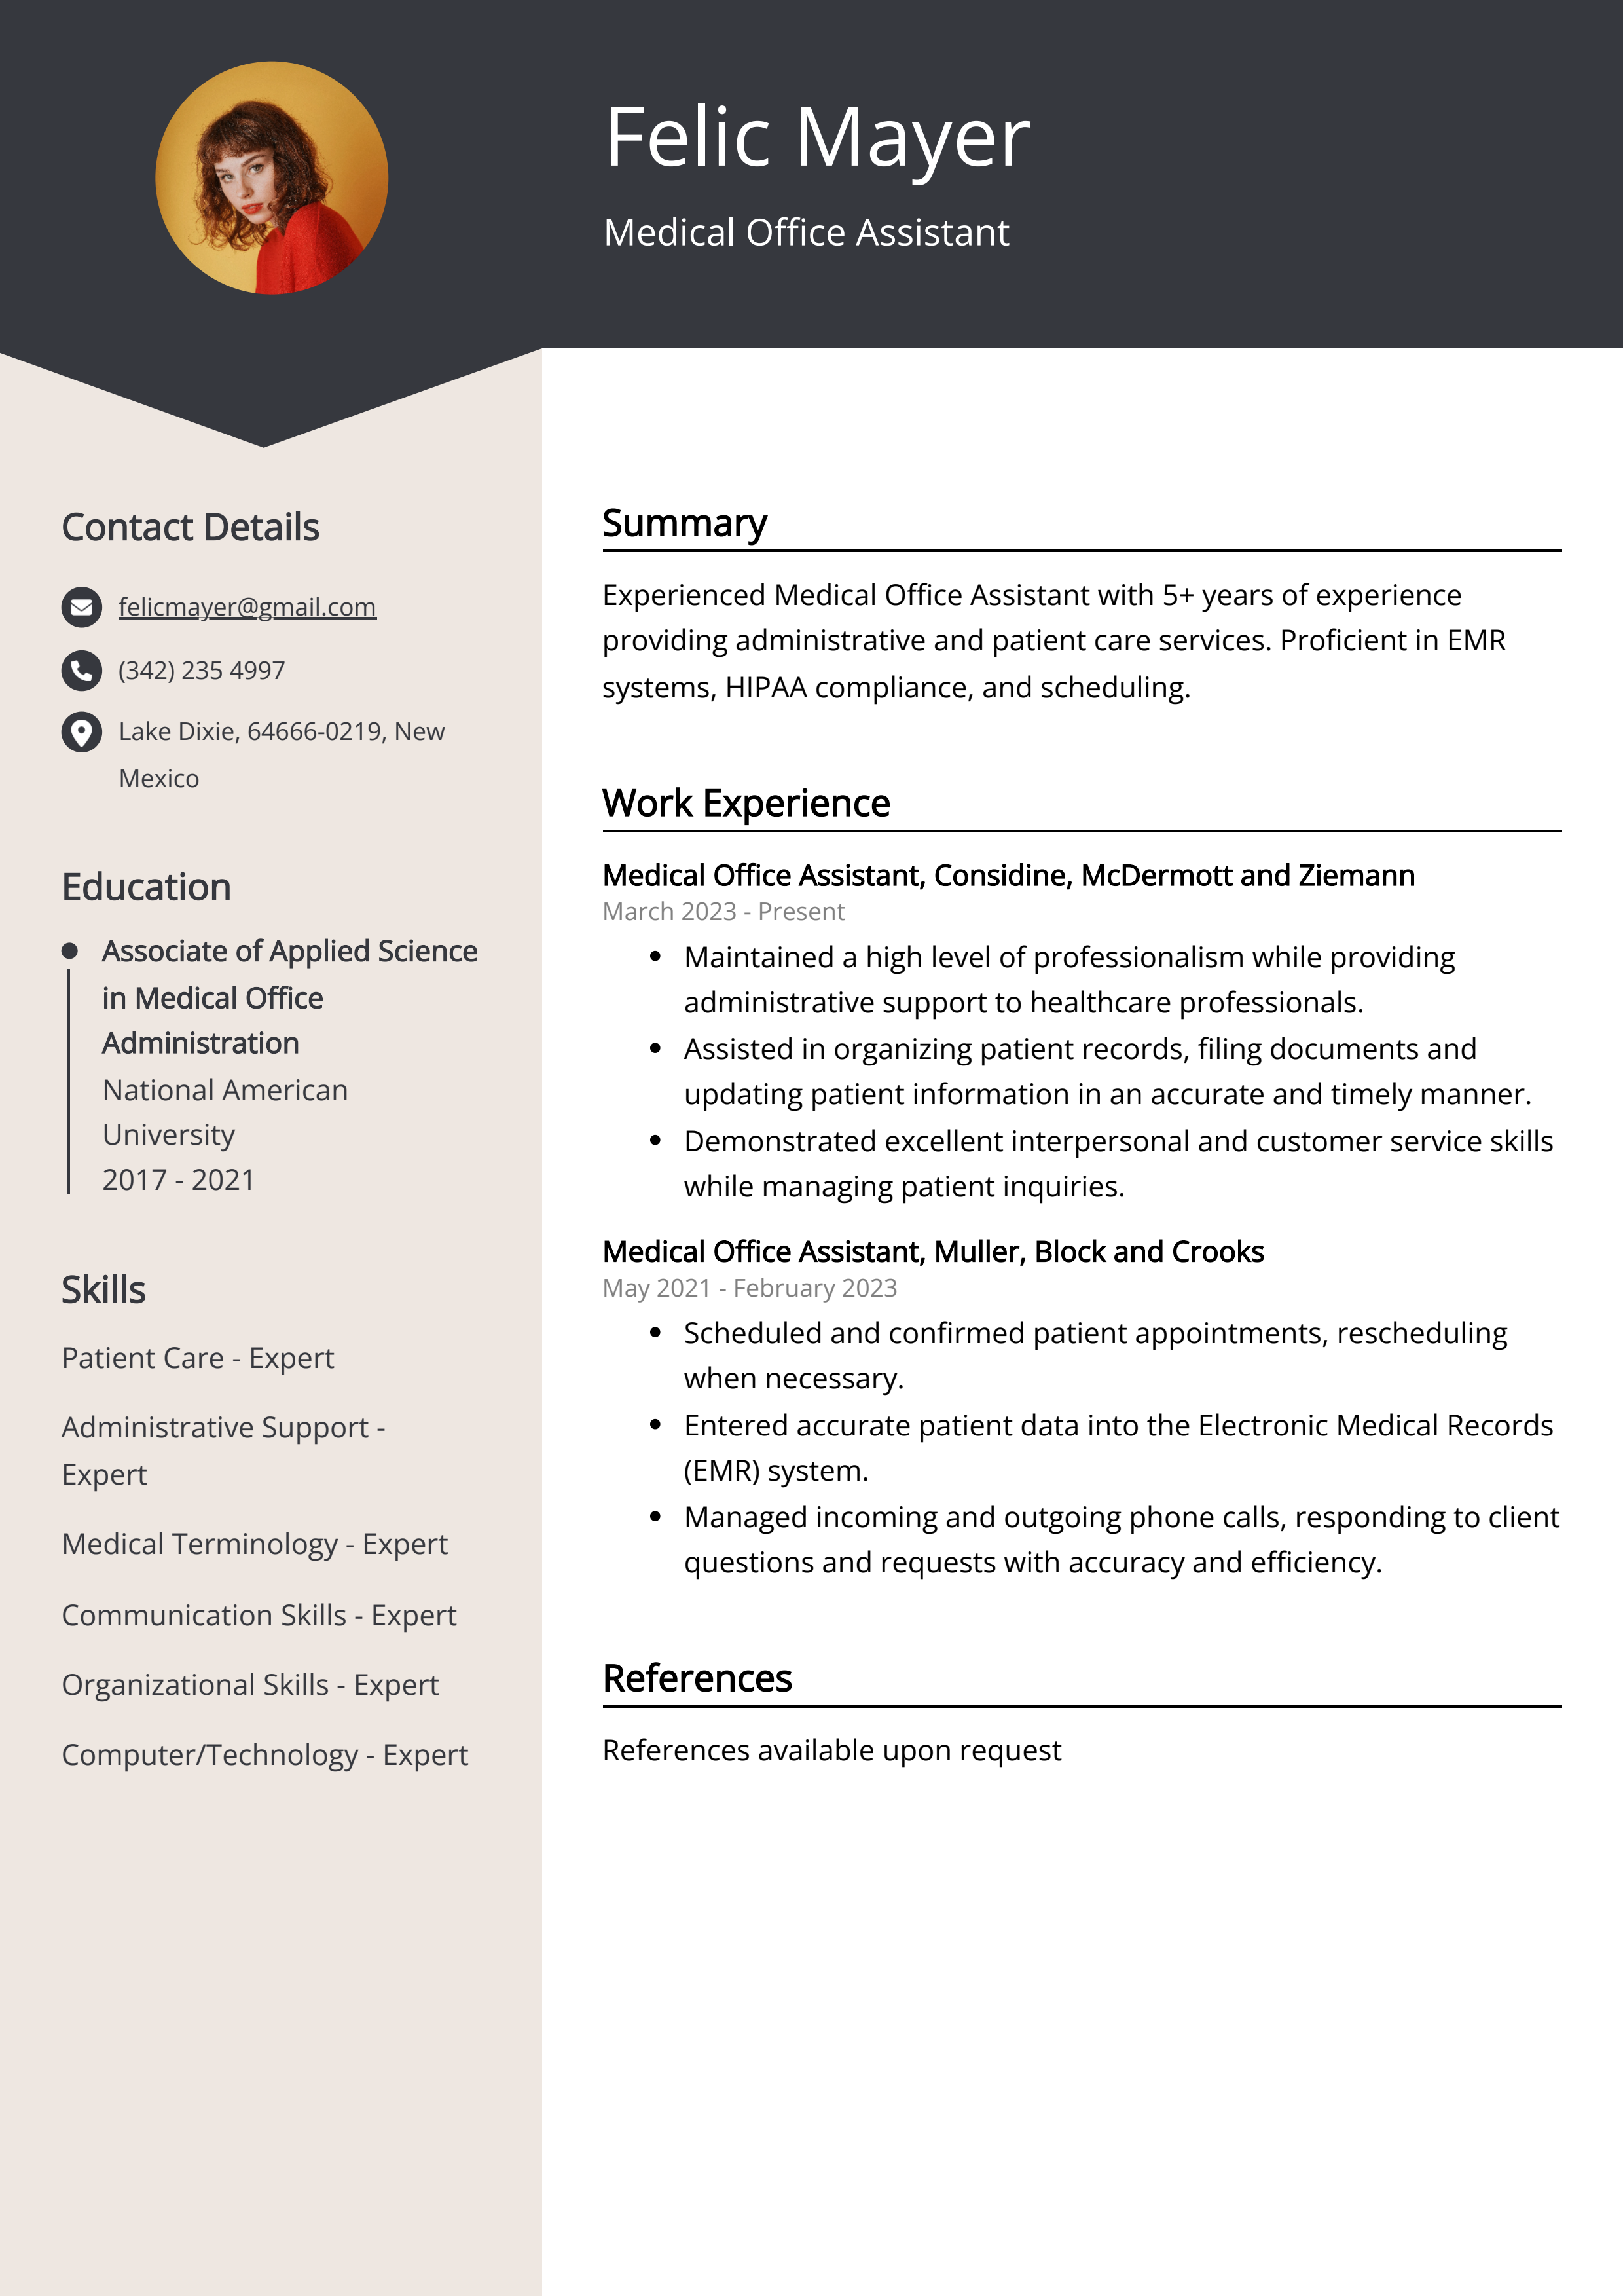 Medical Office Assistant CV Example